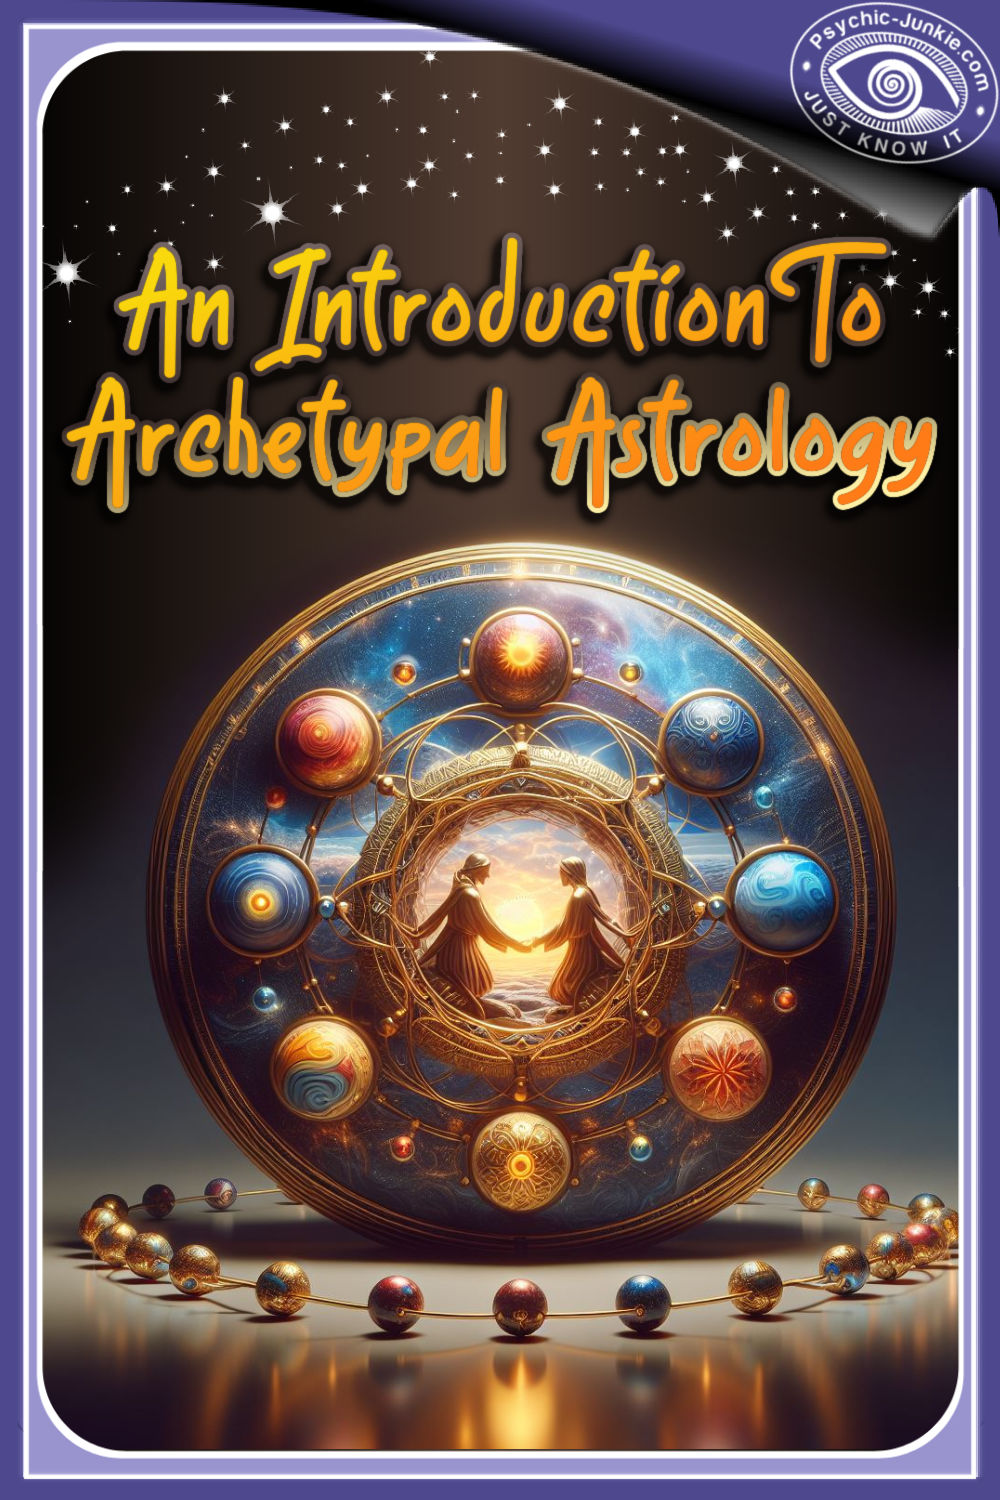 An Introduction To The Archetypal Astrology Course